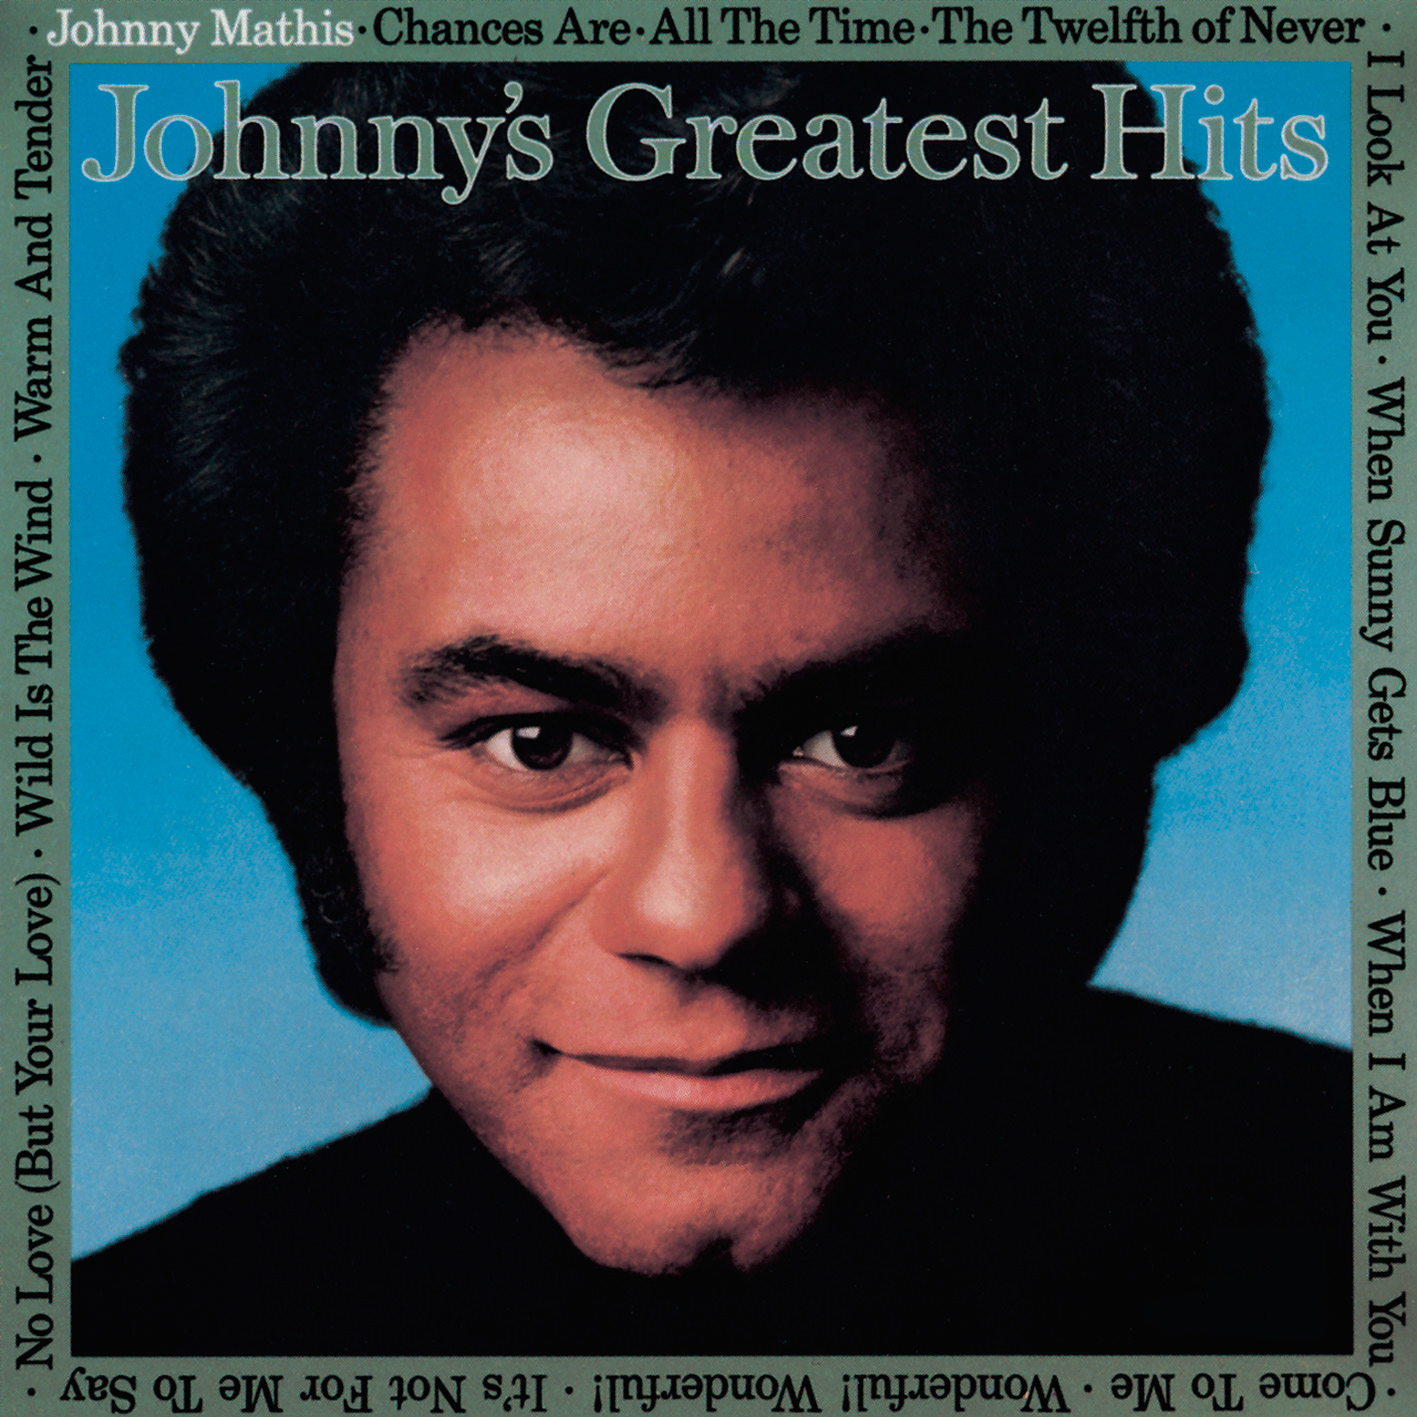 Johnny Mathis - Johnny’s Greatest Hits (1958/2018) [AcousticSounds FLAC 24bit/192kHz]